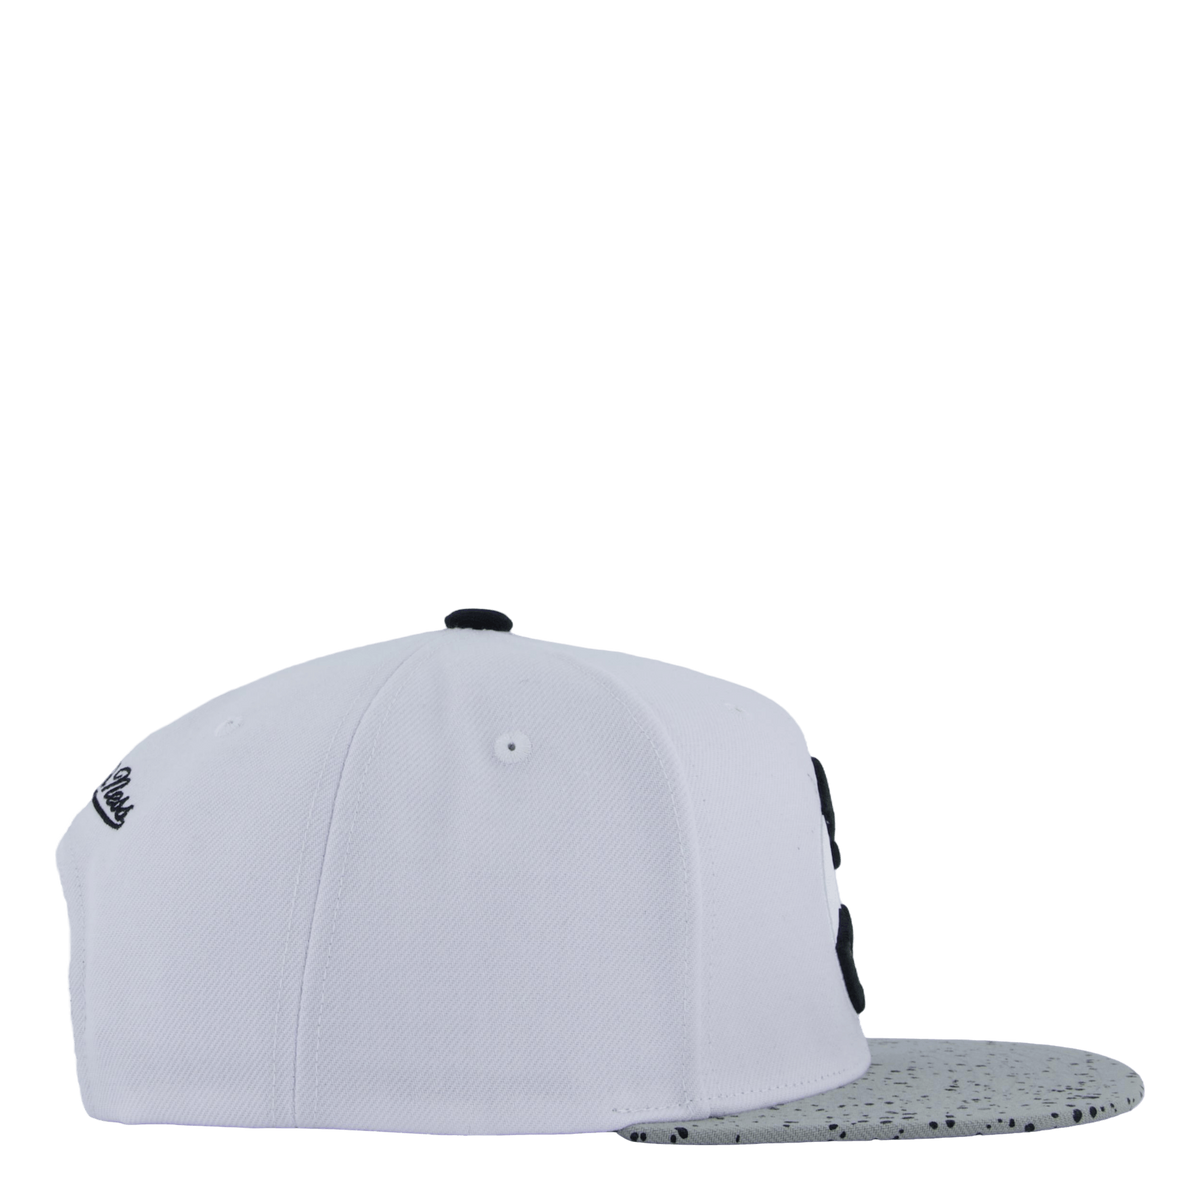 Cement Top Snapback White/silver